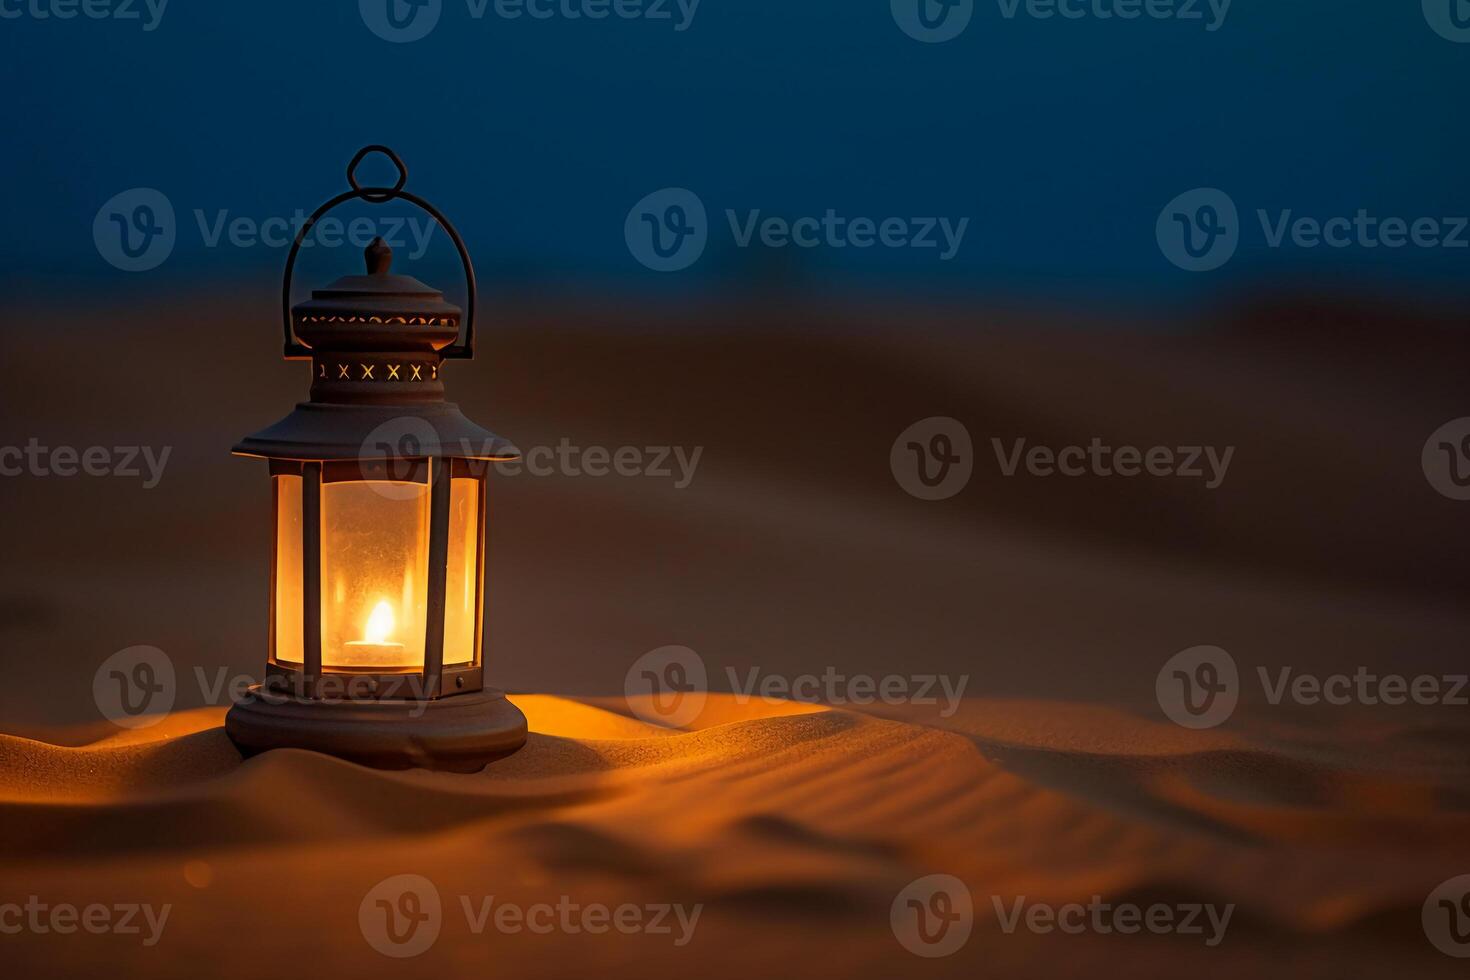 A lantern, surrounded by sands. photo